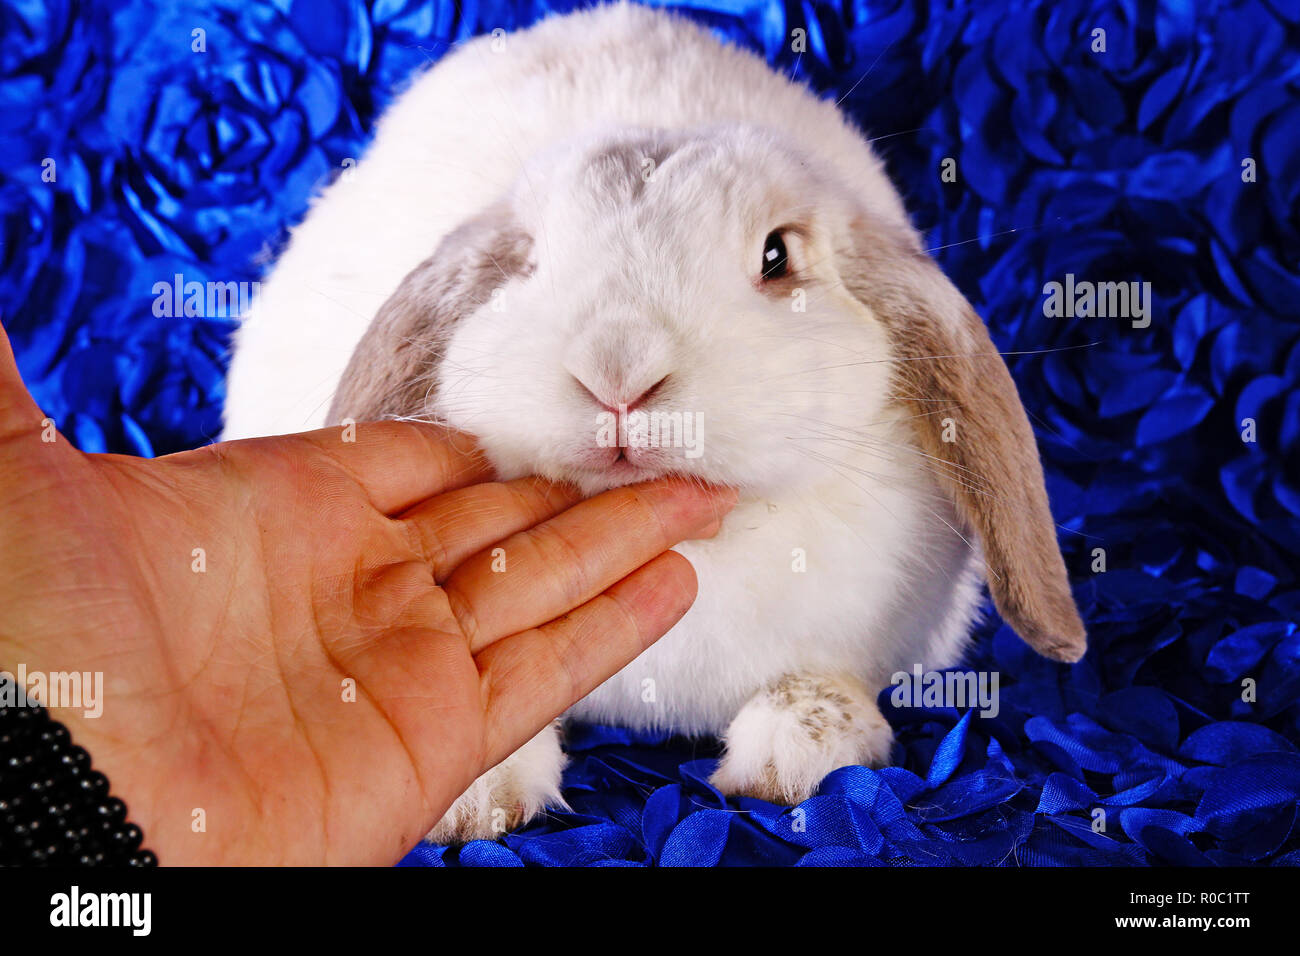 Cute little young bunny rabbit lop eared dwarf rabbits Stock Photo